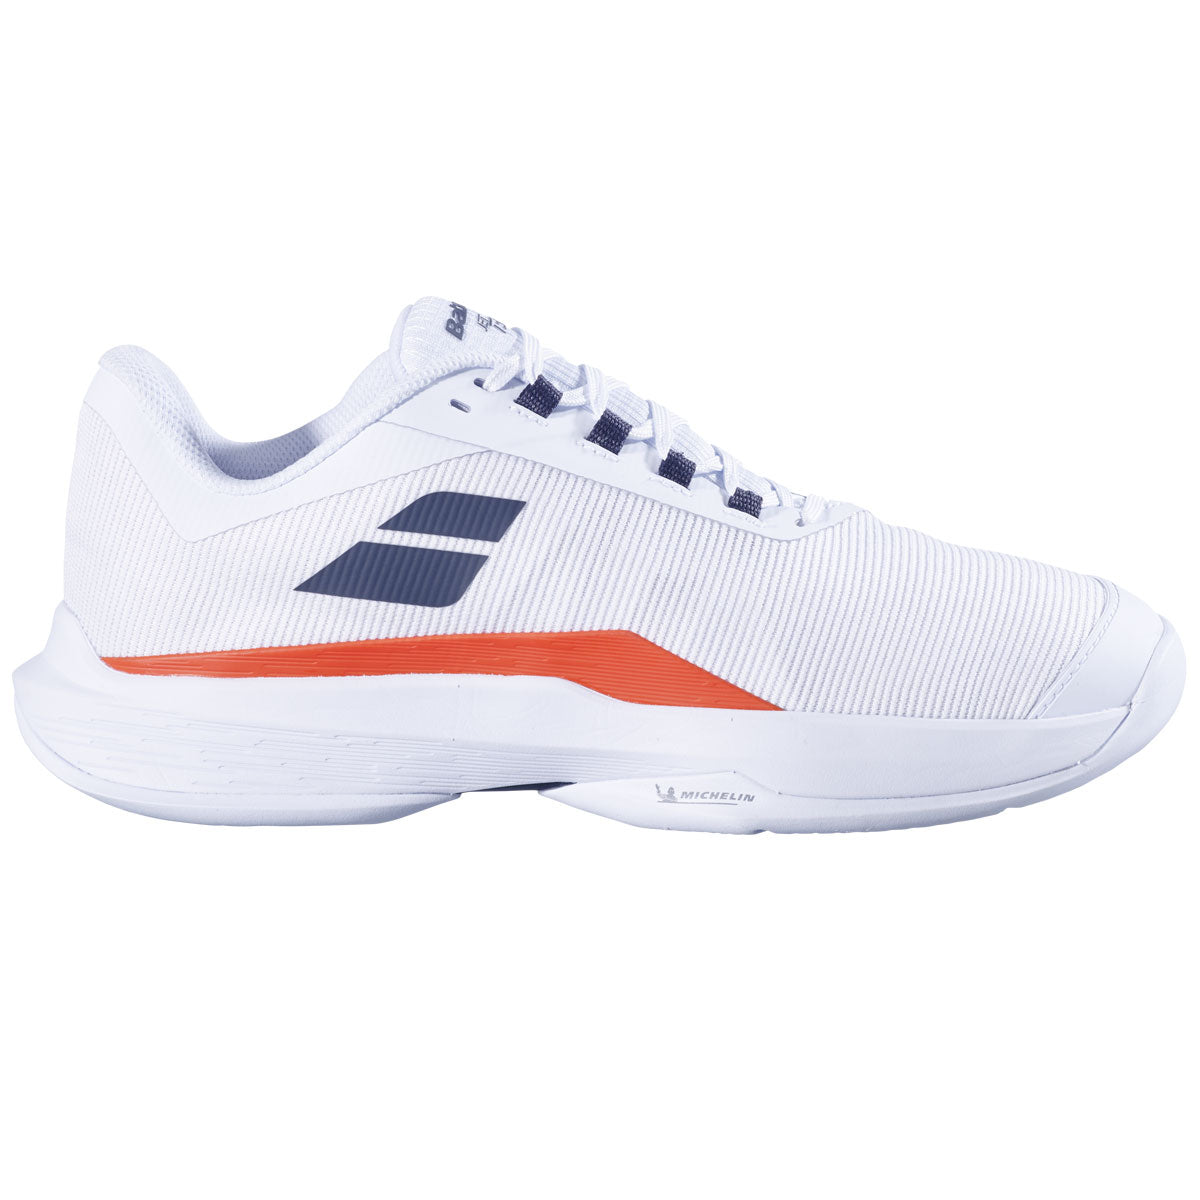 Babolat Jet Tere 2 All-Court Men Tennis Shoes - White/Strike Red